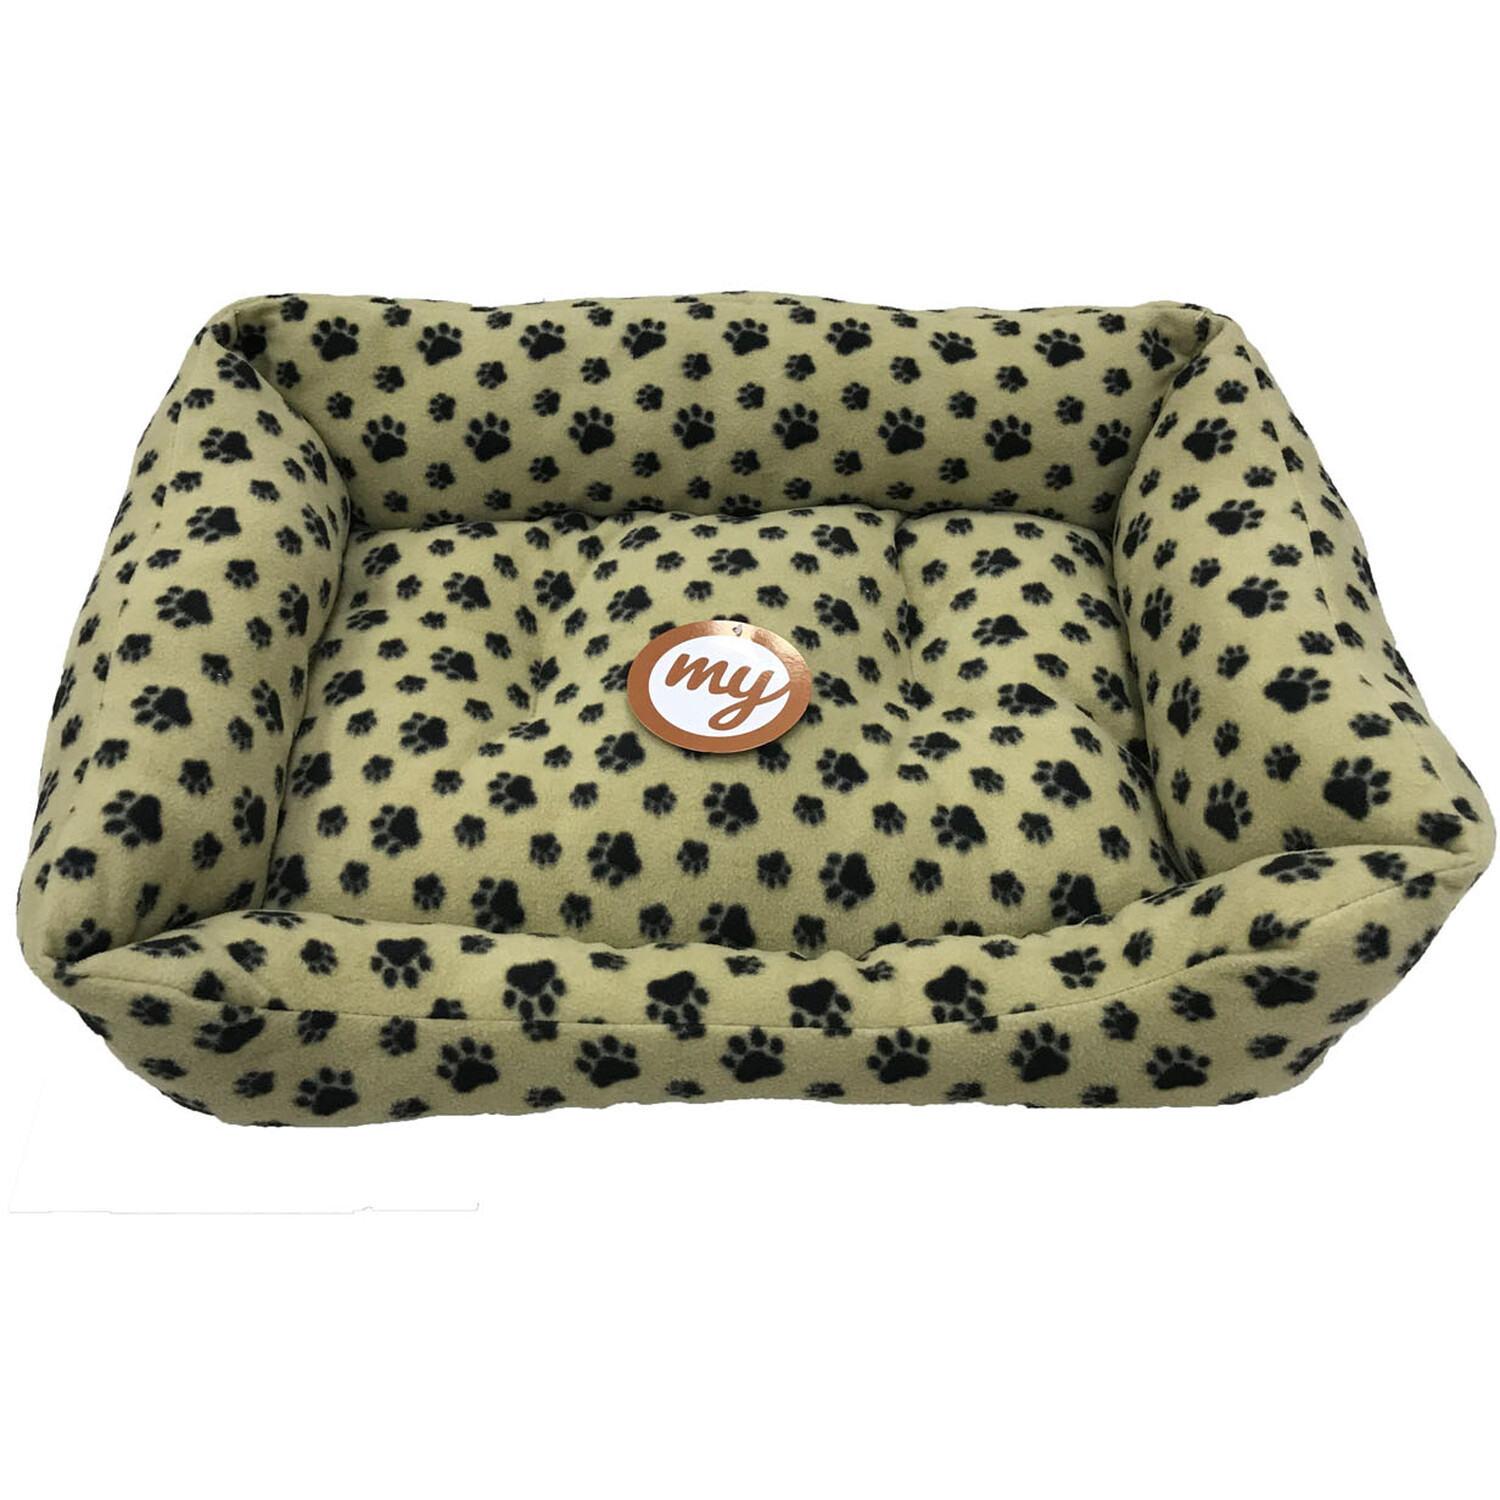 Single My Fleece Soft Dog Bed in Assorted styles Image 1